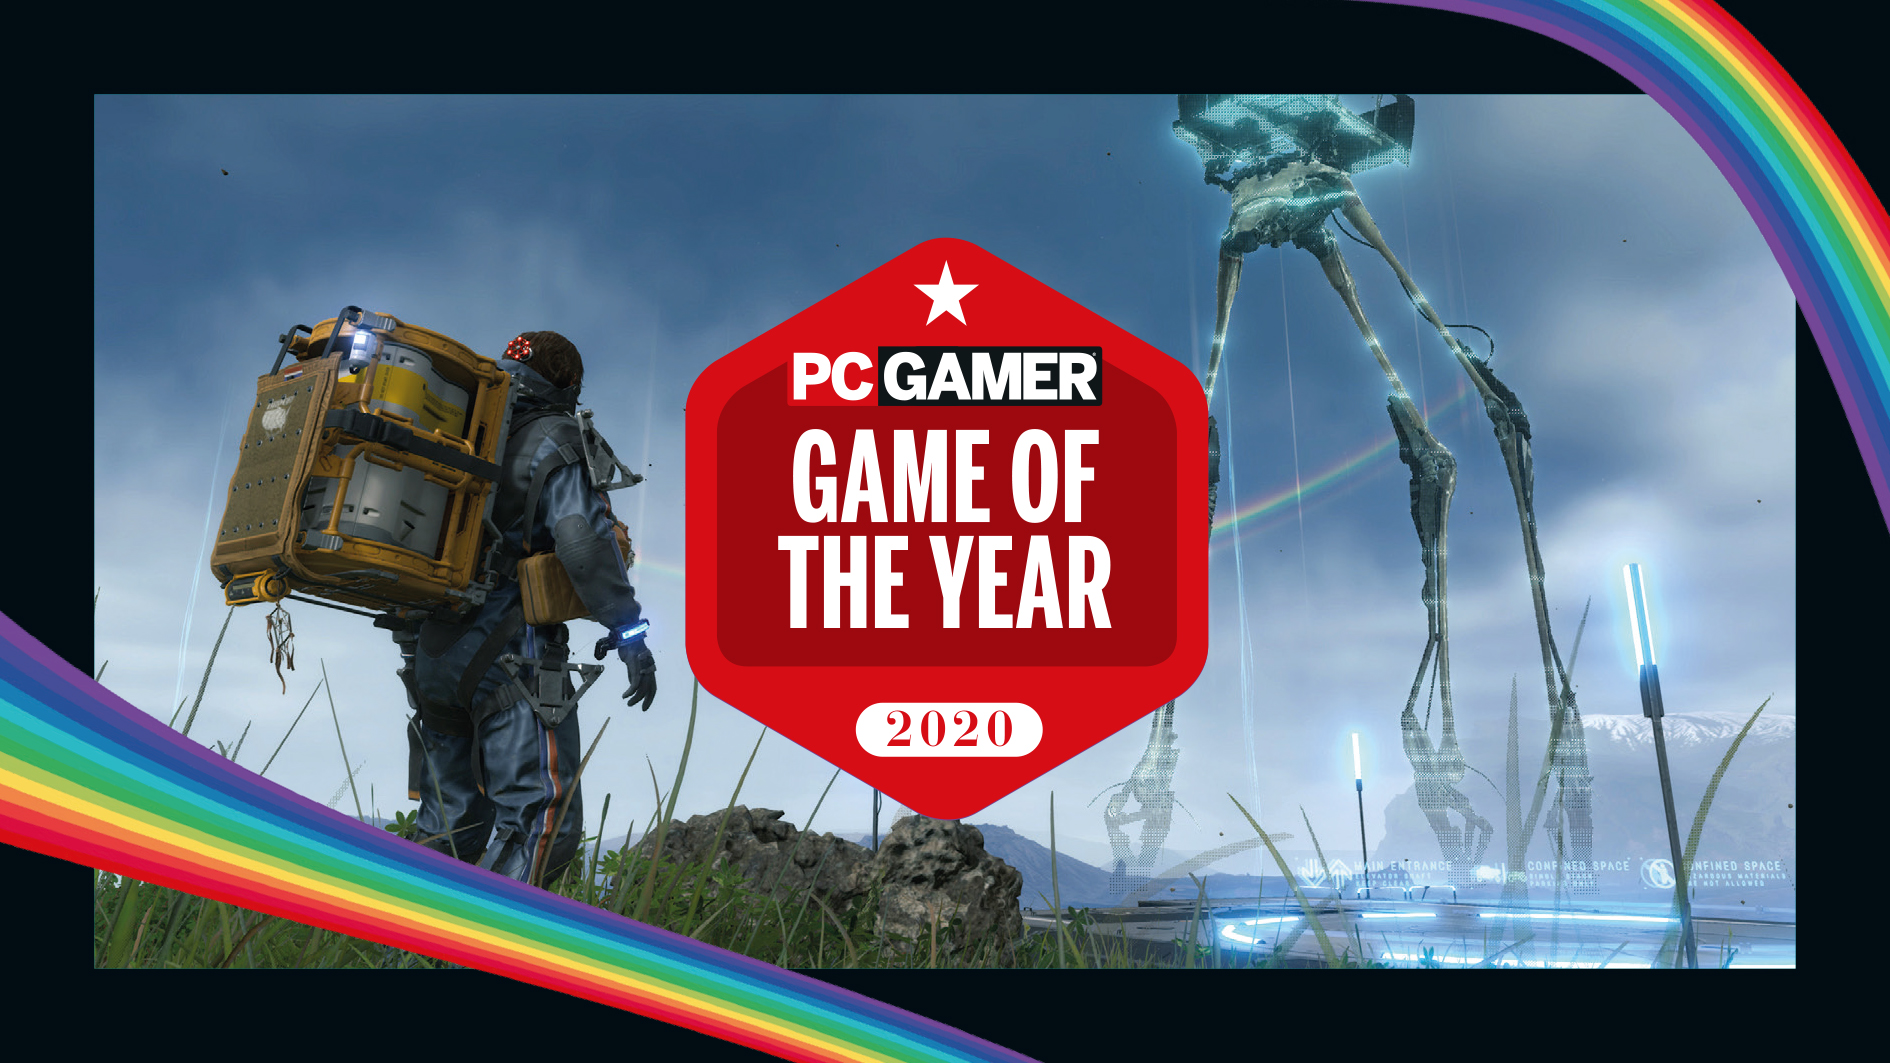 DSOGaming – Here are our Games of the Year 2020